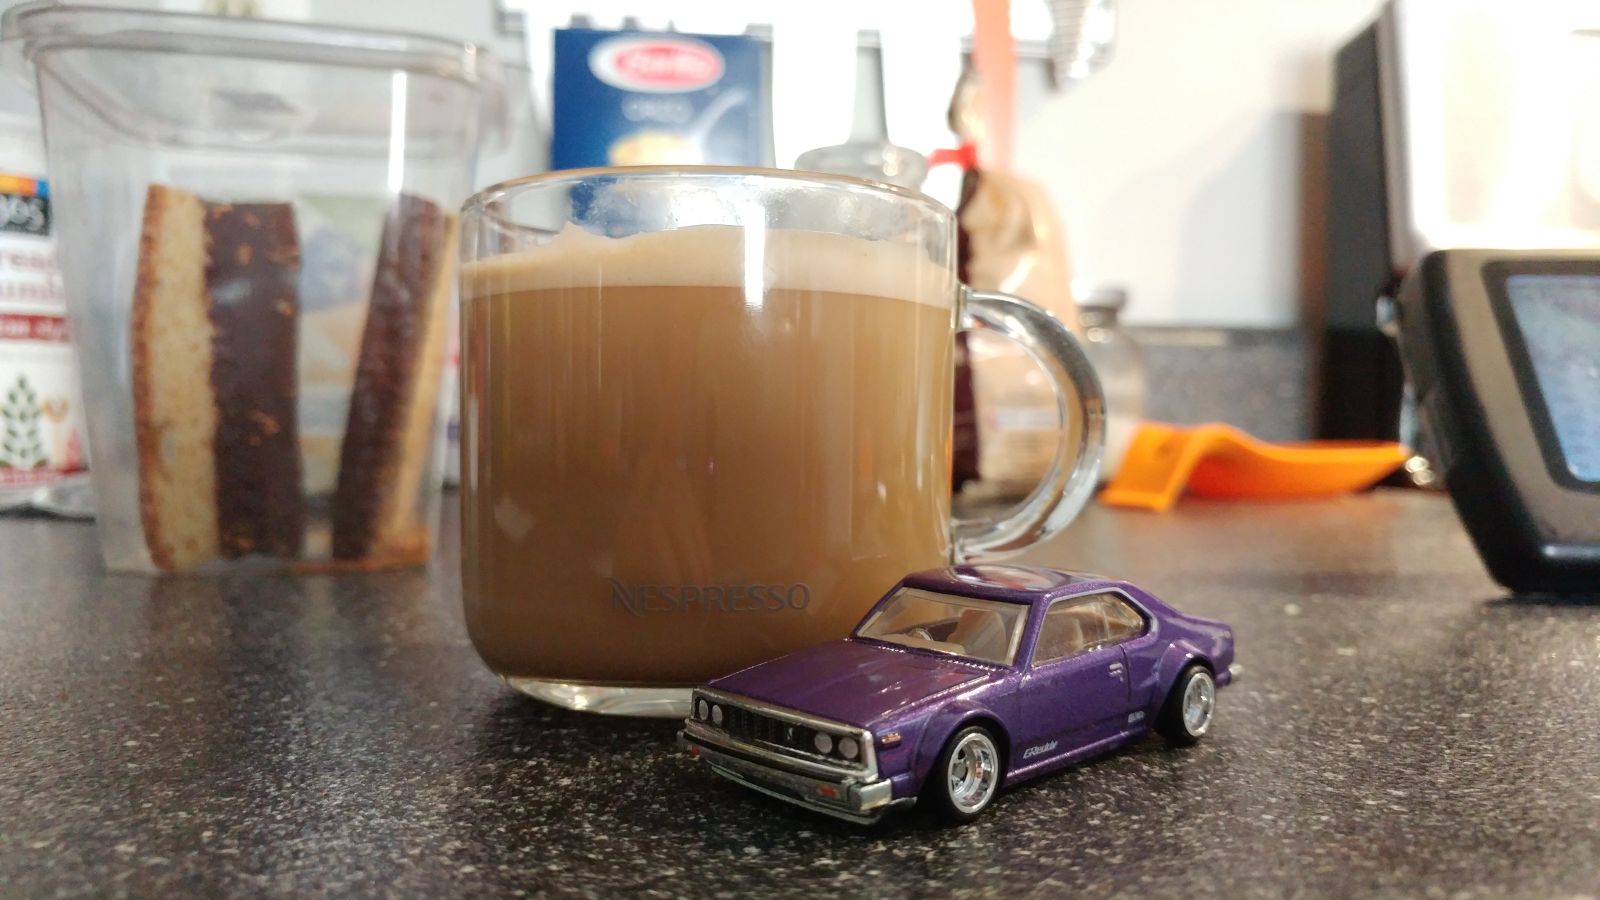 What goes well with cars? Coffee, that’s what. Shoutout to Nespress.